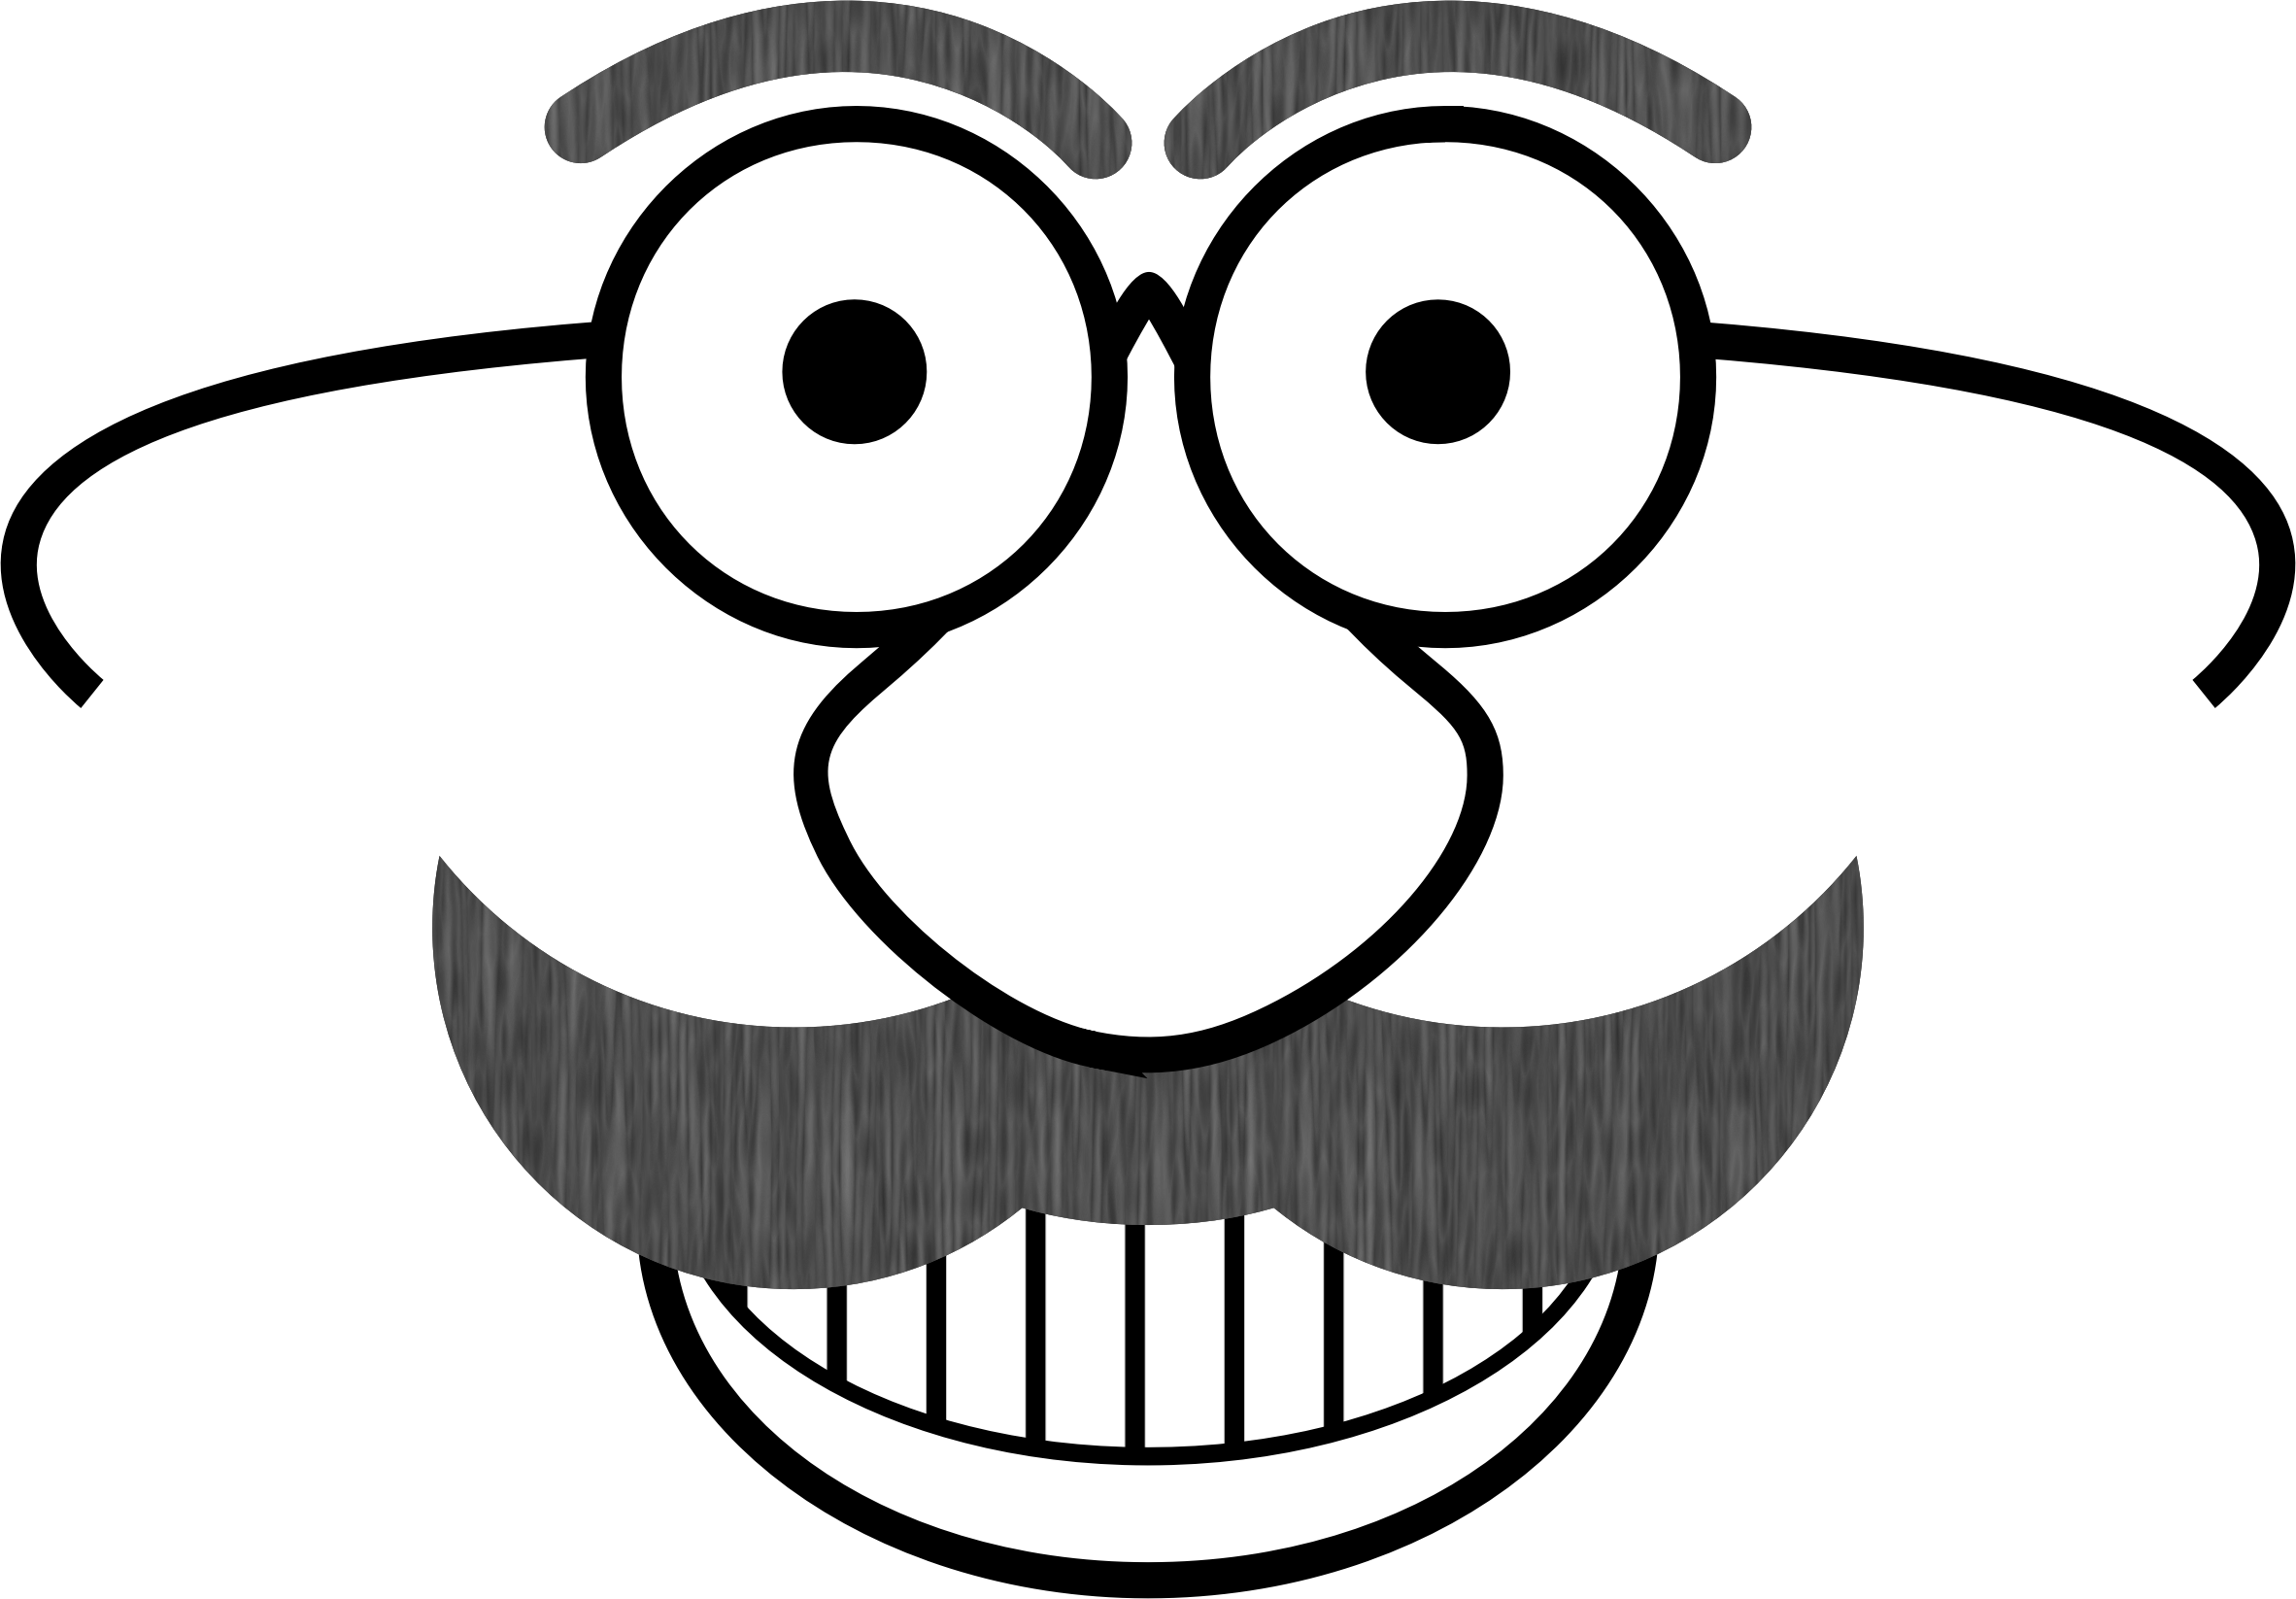 Silly Face 2 Remix - Smiley Face Black And White Png (2364x1646)